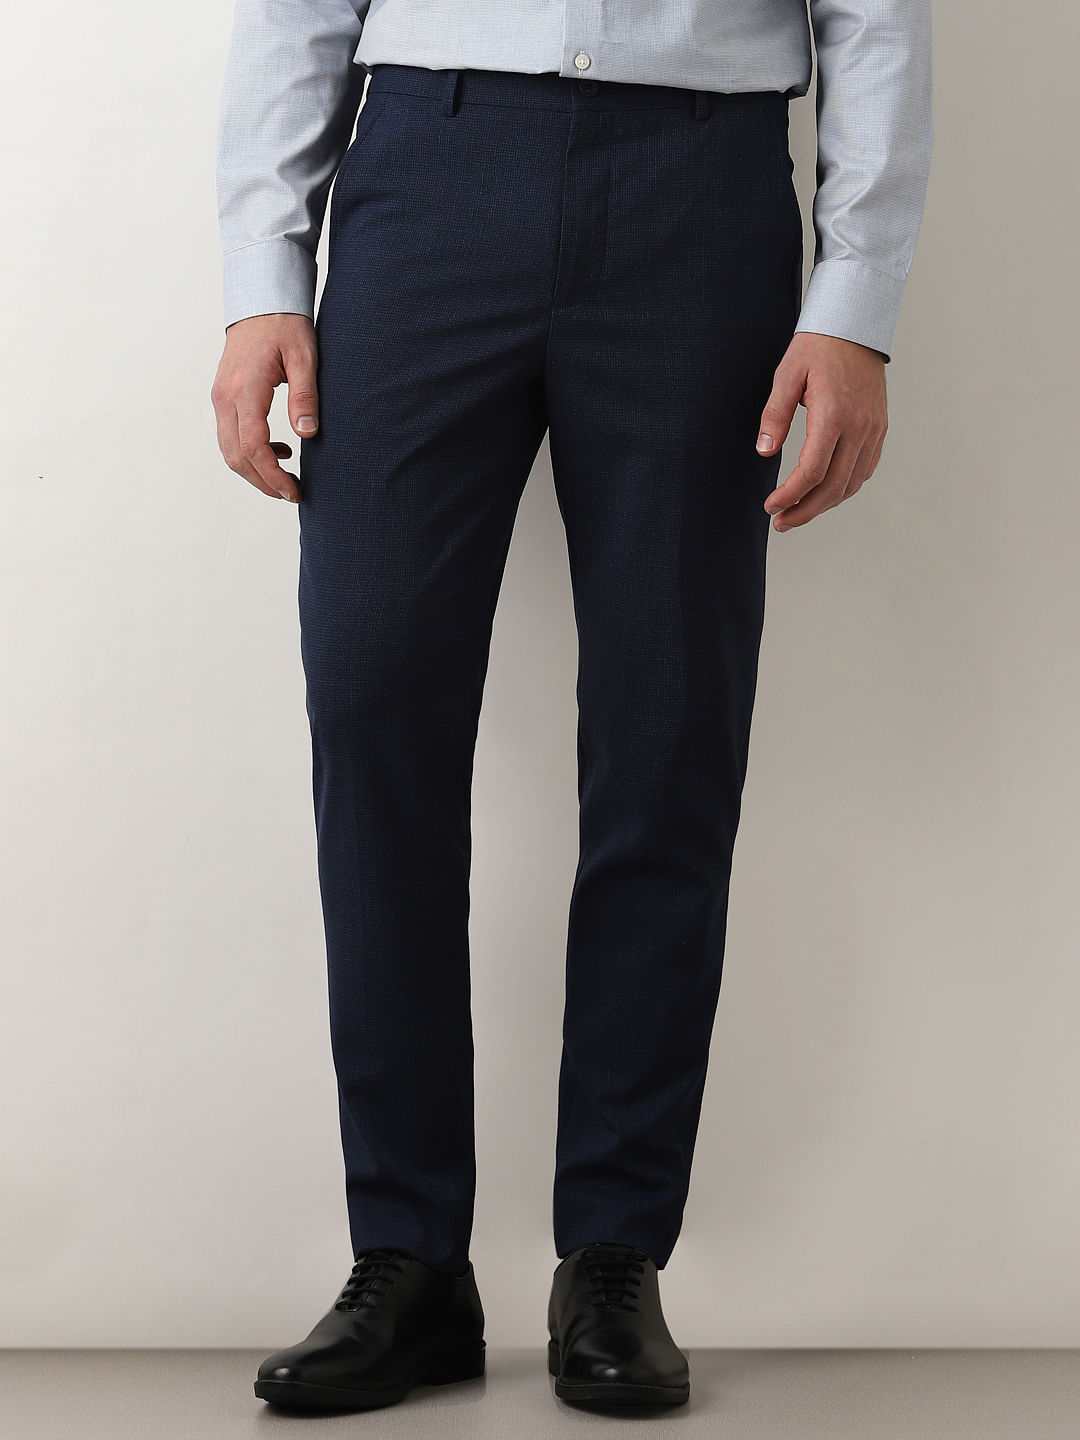 Buy JEENAY Synthetic Formal Pants for Men | Mens Fashion Wrinkle-free  Stylish Slim Fit Men's Wear Trouser Pant for Office or Party - 30 US, Navy  Blue Online at Best Prices in